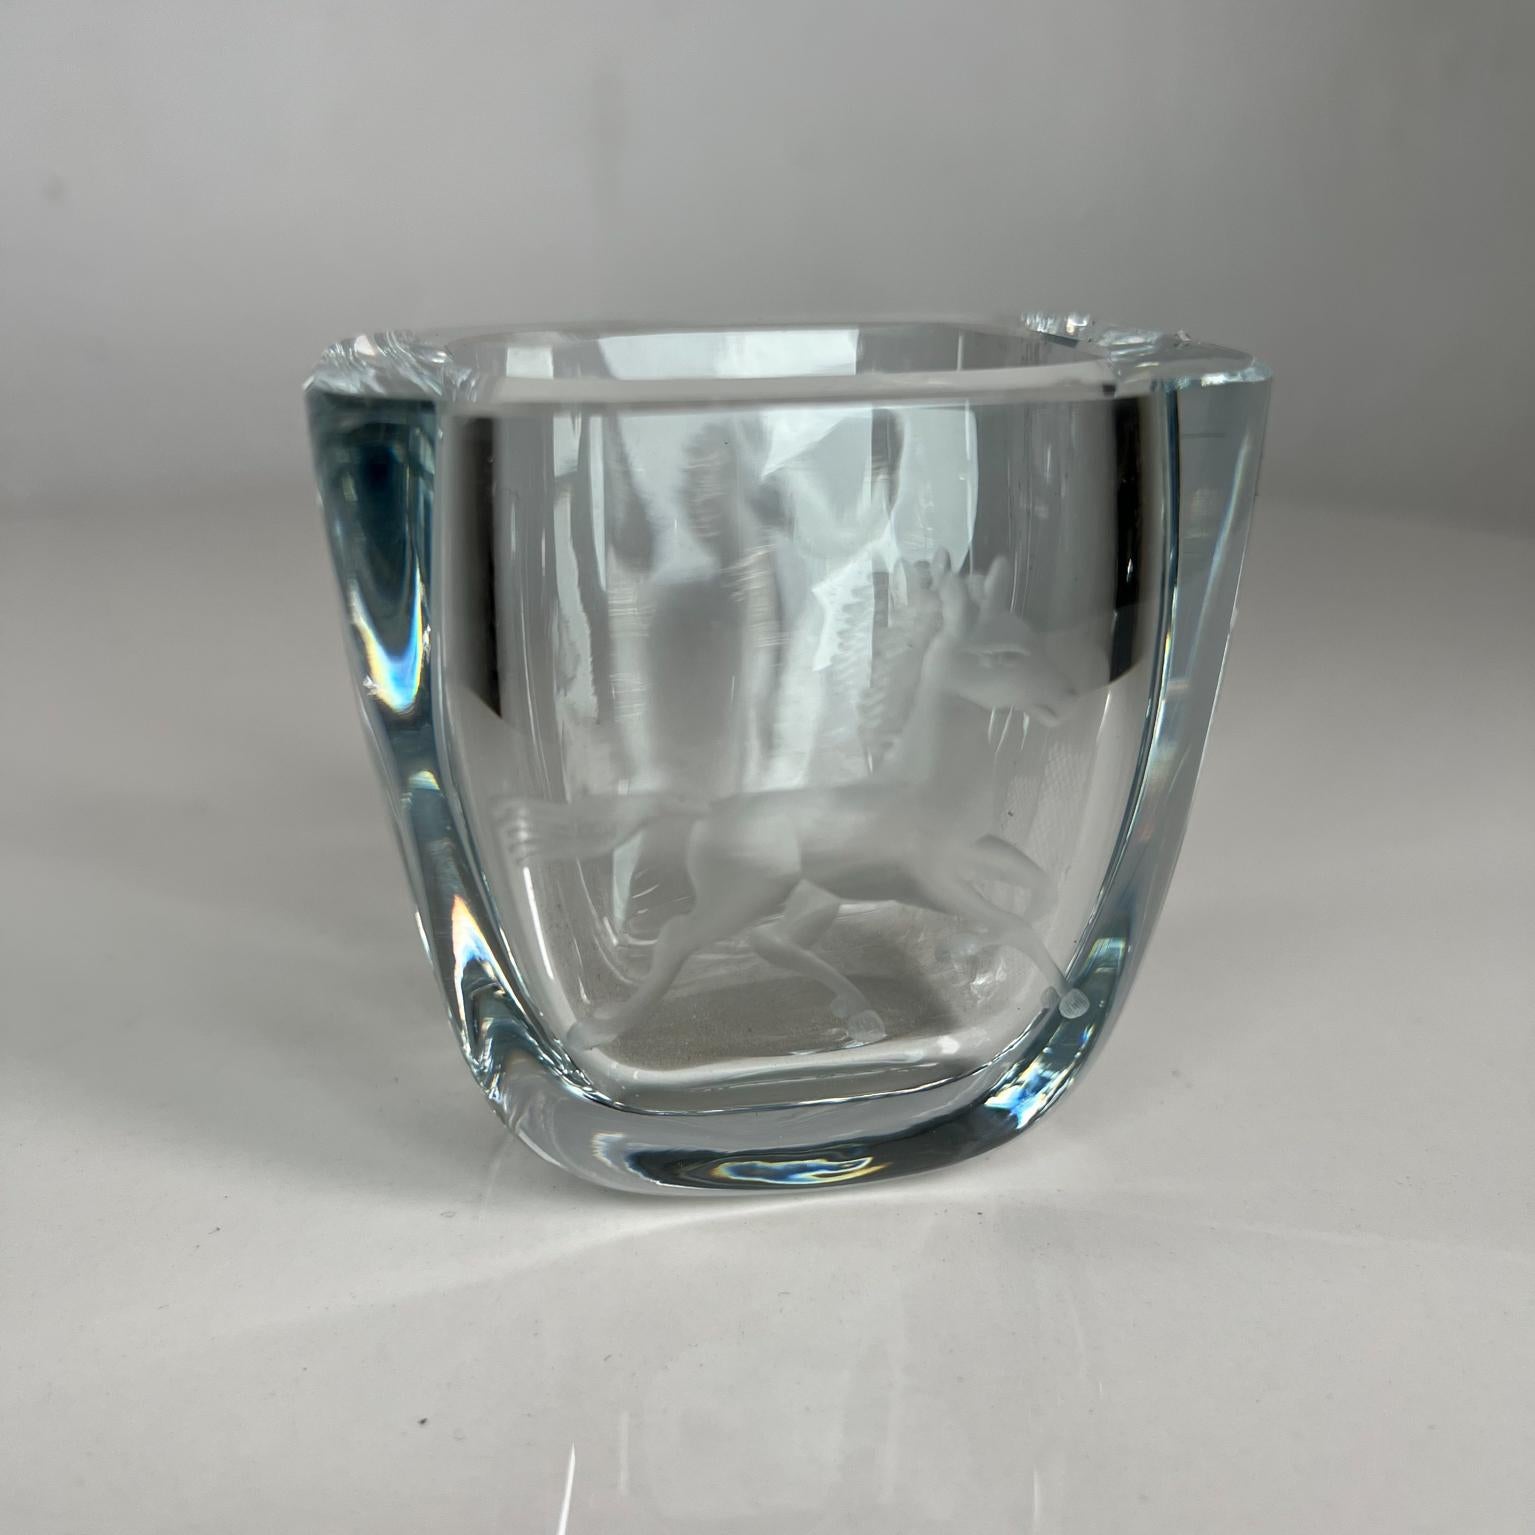 1960s Modernist Strombergshyttan glass vase from Sweden
Arched form etched art glass with horse image attributed Gunnar Nyland designer
Measures: 3 x 2.75 x 3 tall
Original unrestored vintage condition.
See images provided.
  